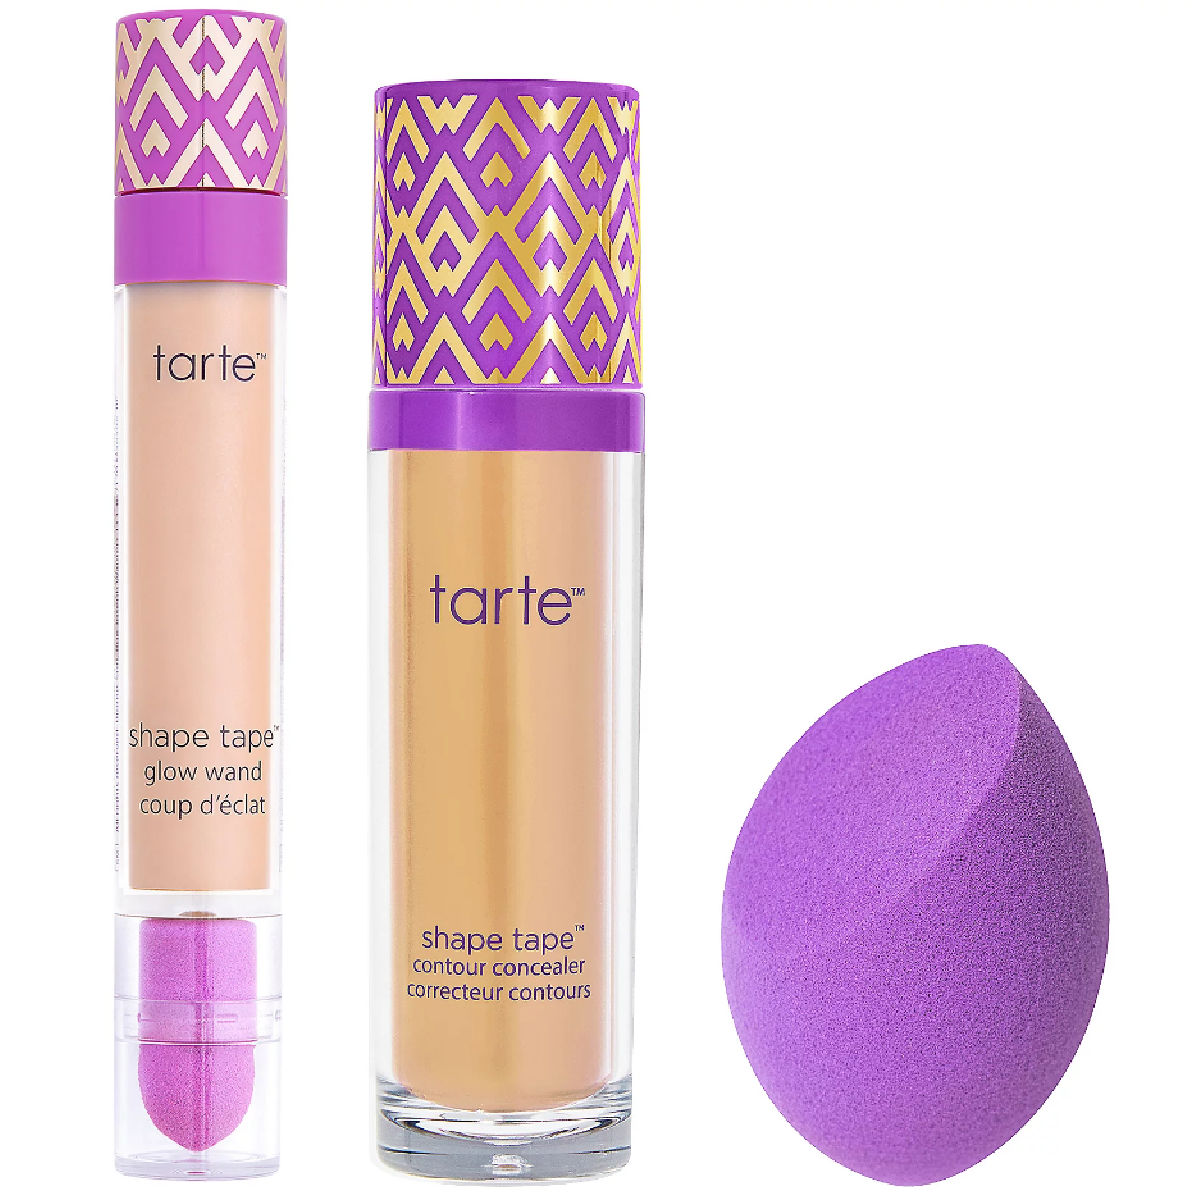 tarte Super-size Shape Tape Light & Lifted 3pc Collection